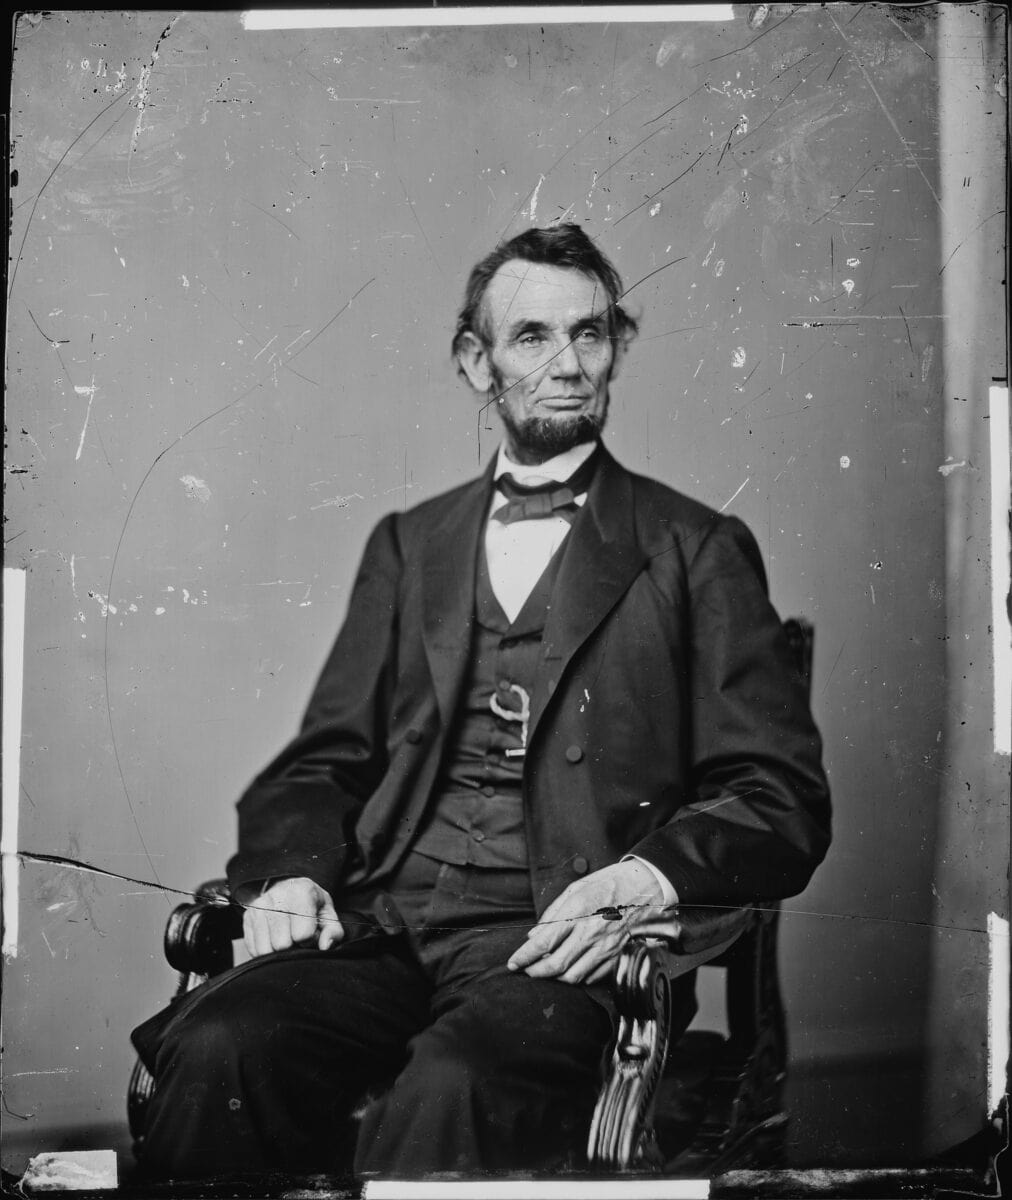 One of the oldest photos in history - a portrait of Ambraham Lincoln